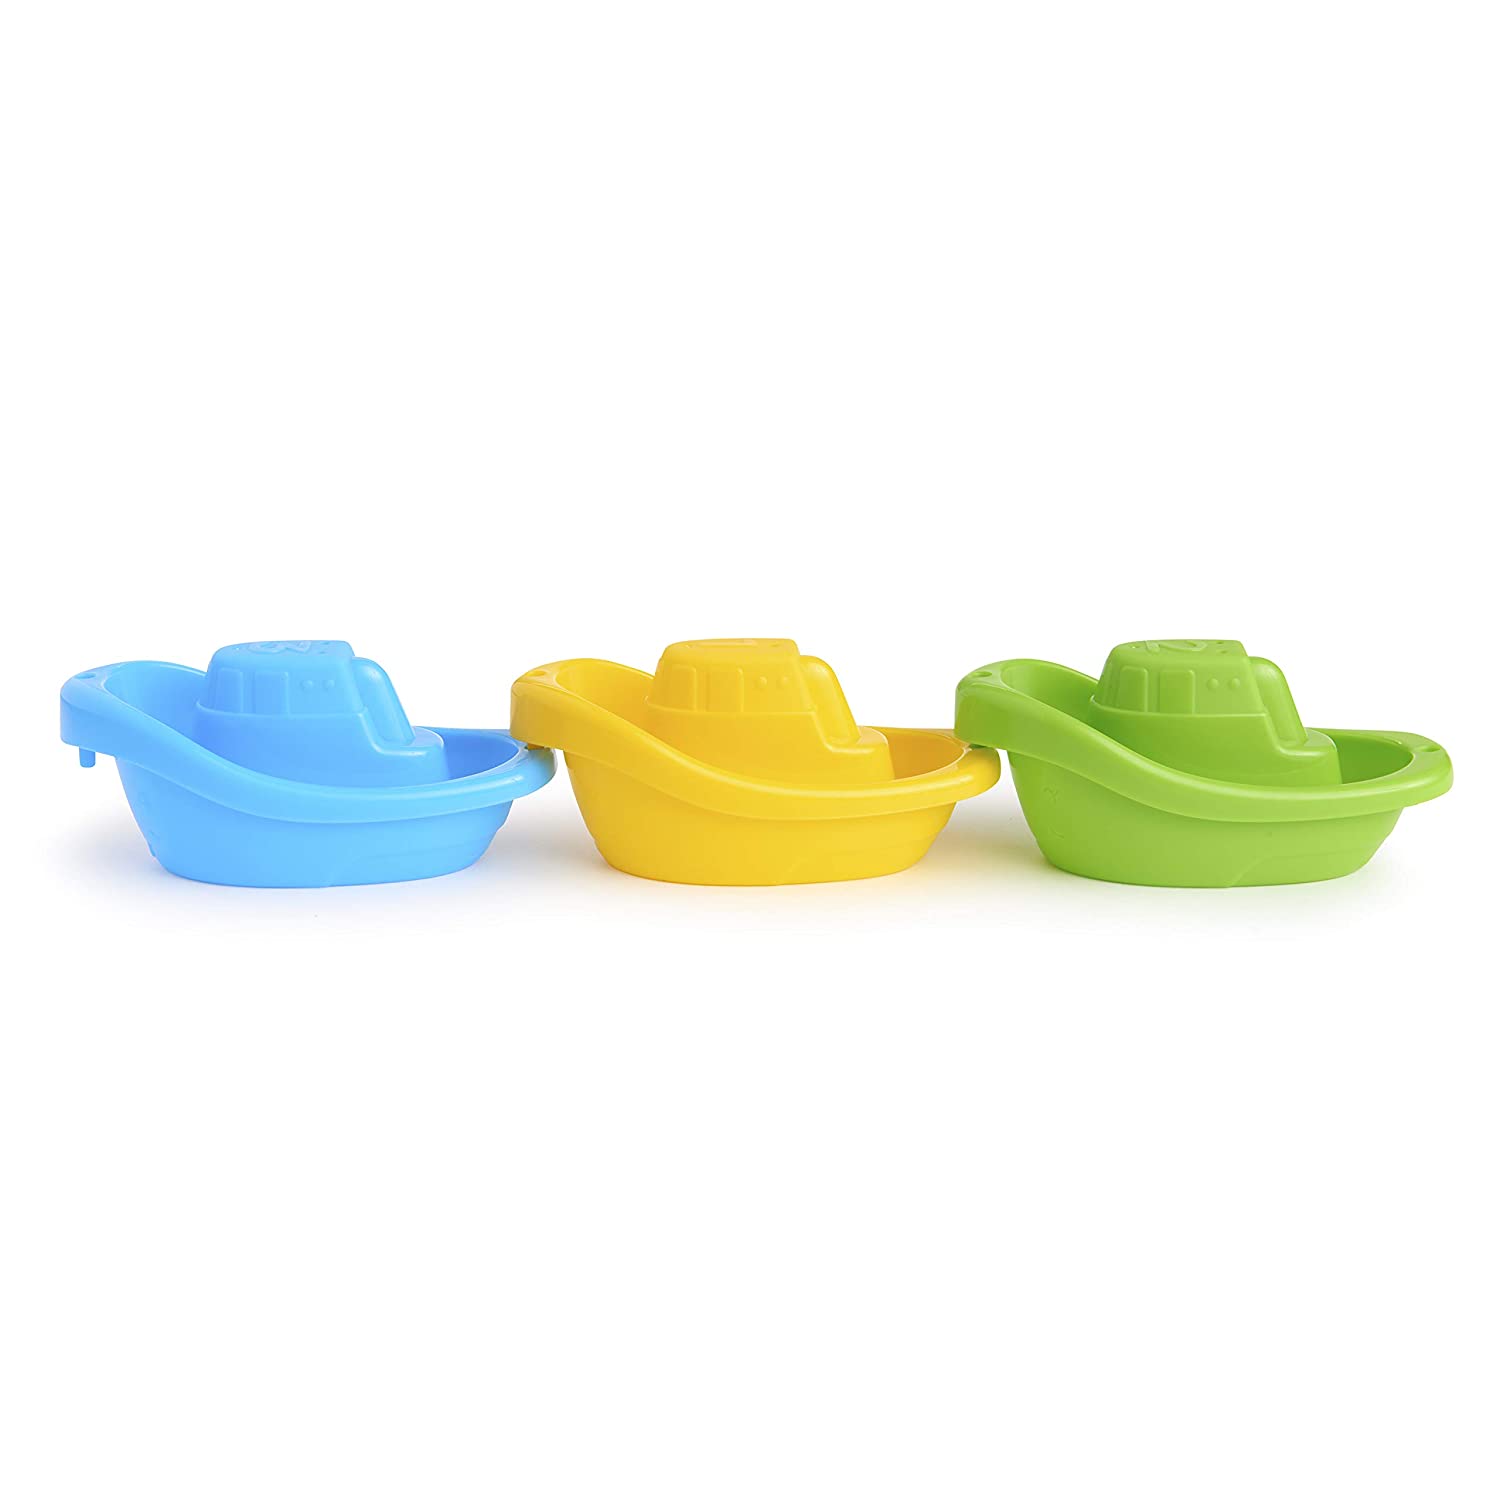 Munchkin Little Boat Train Baby and Toddler Bath Toy, 3 Piece Set.